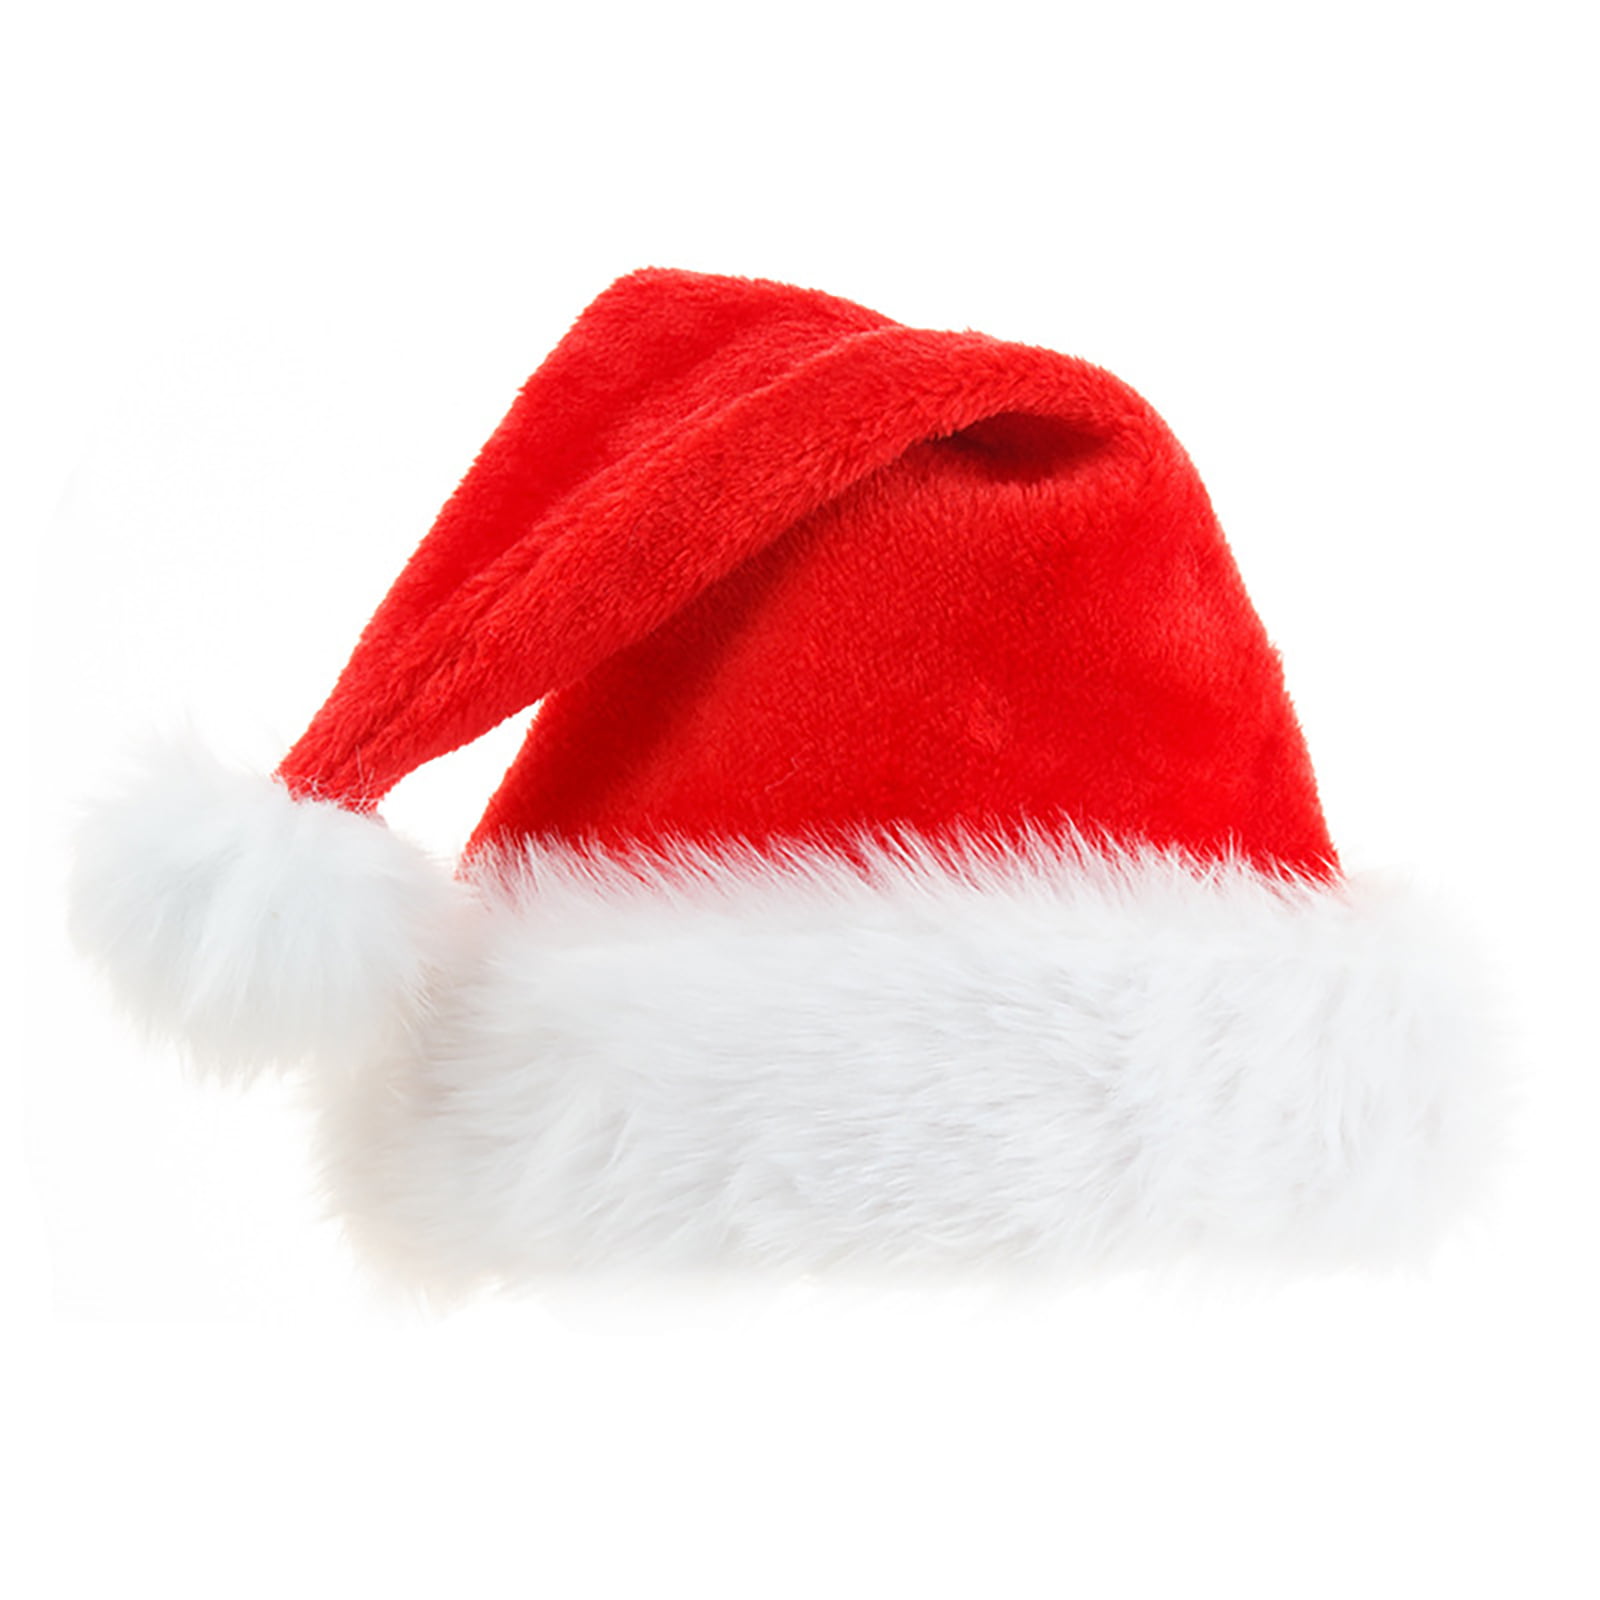 Extra Thicken Red and White Plush Santa Hat-Christmas Classic Hat for Adult & Child Red & White 